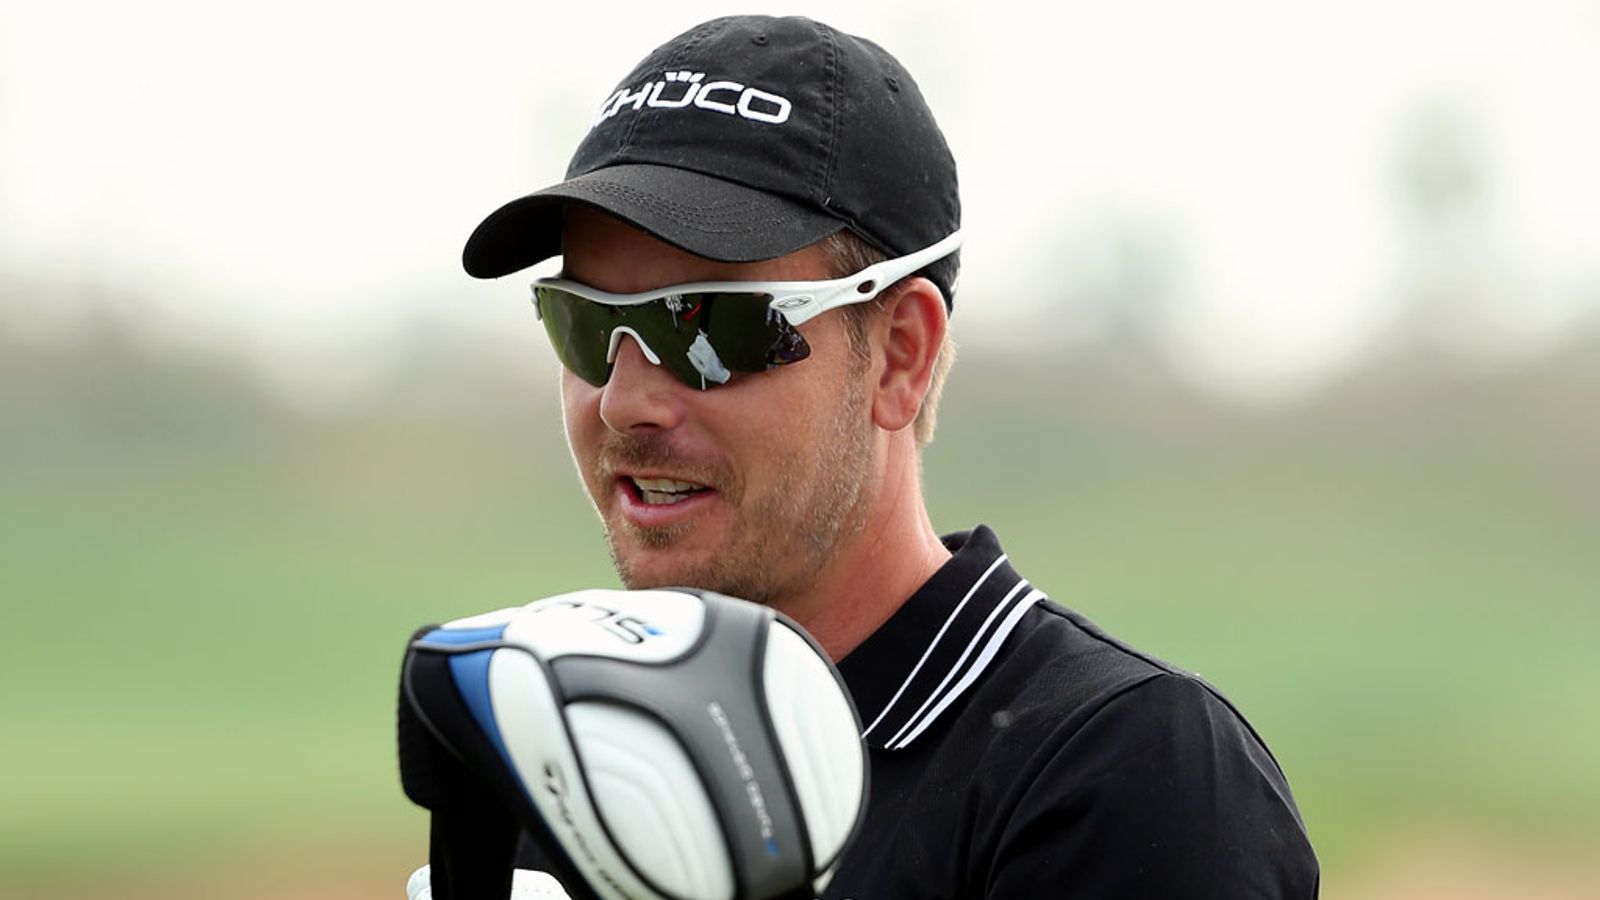 Euro Tour: Sweden's Henrik Stenson says one good display away from